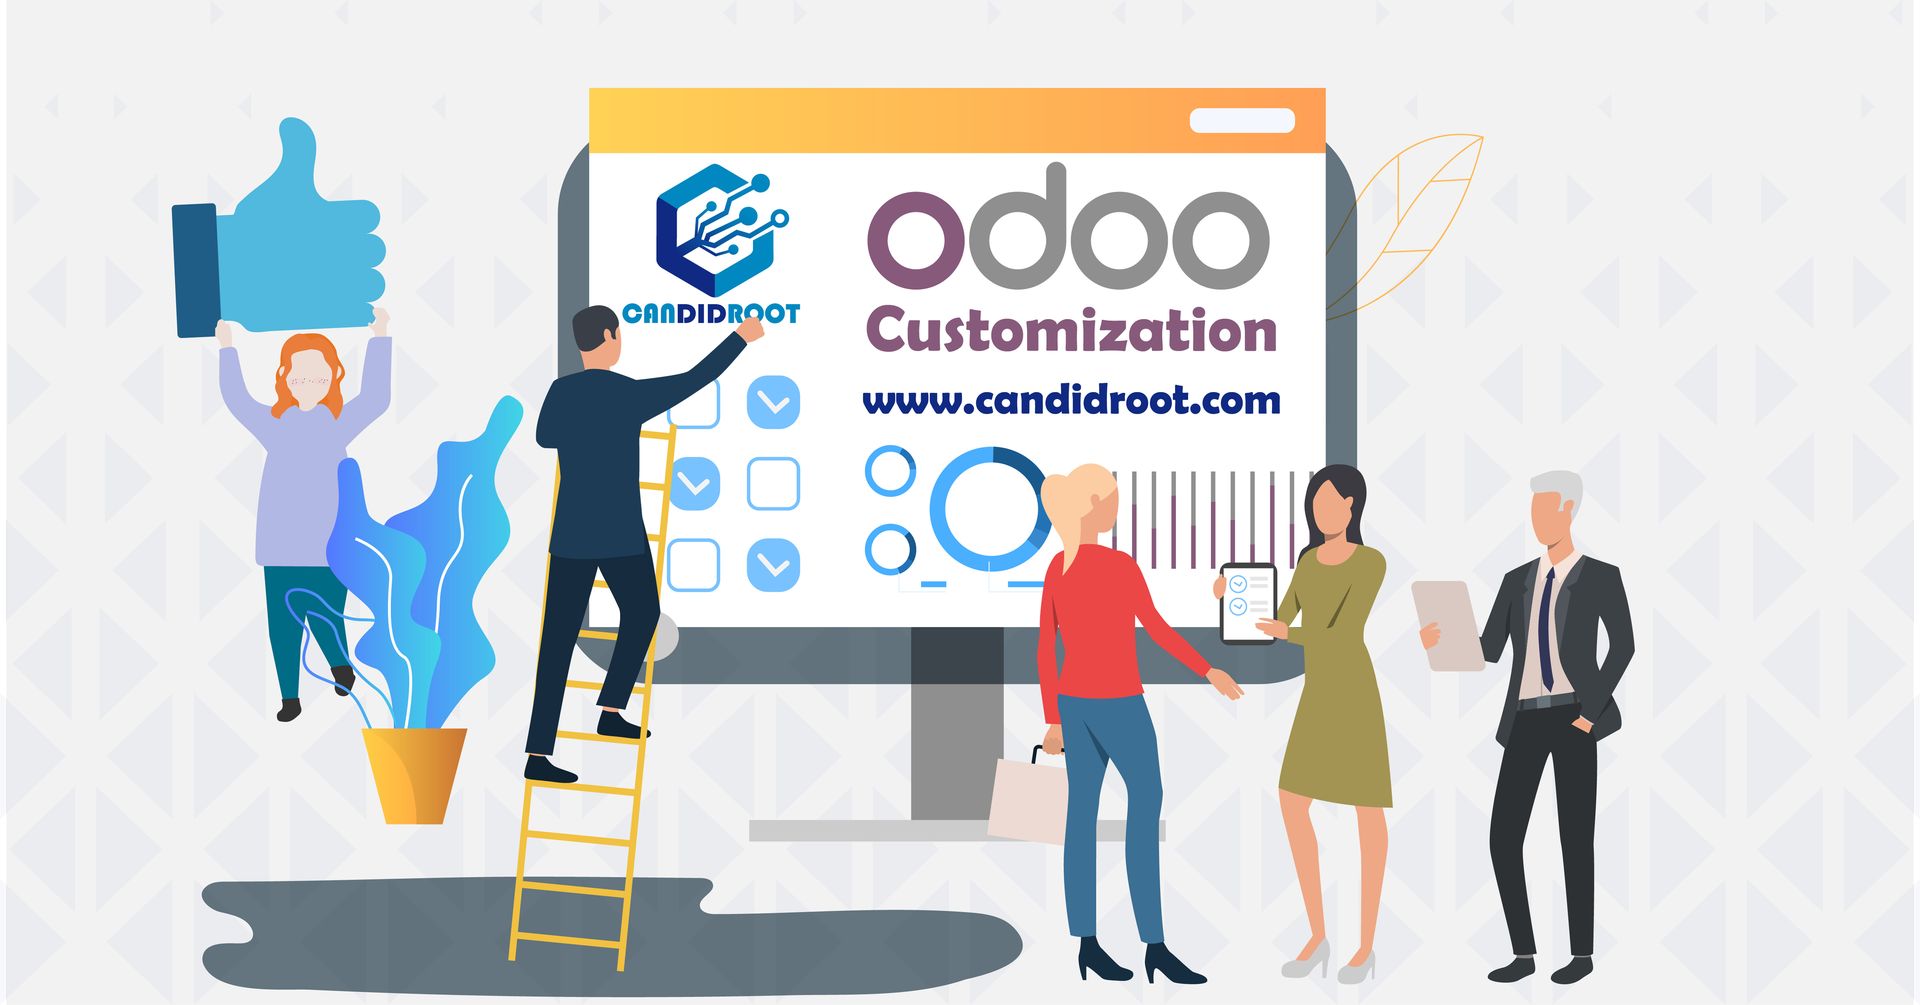 Odoo Customization for More Features at Competitive Price | CandidRoot